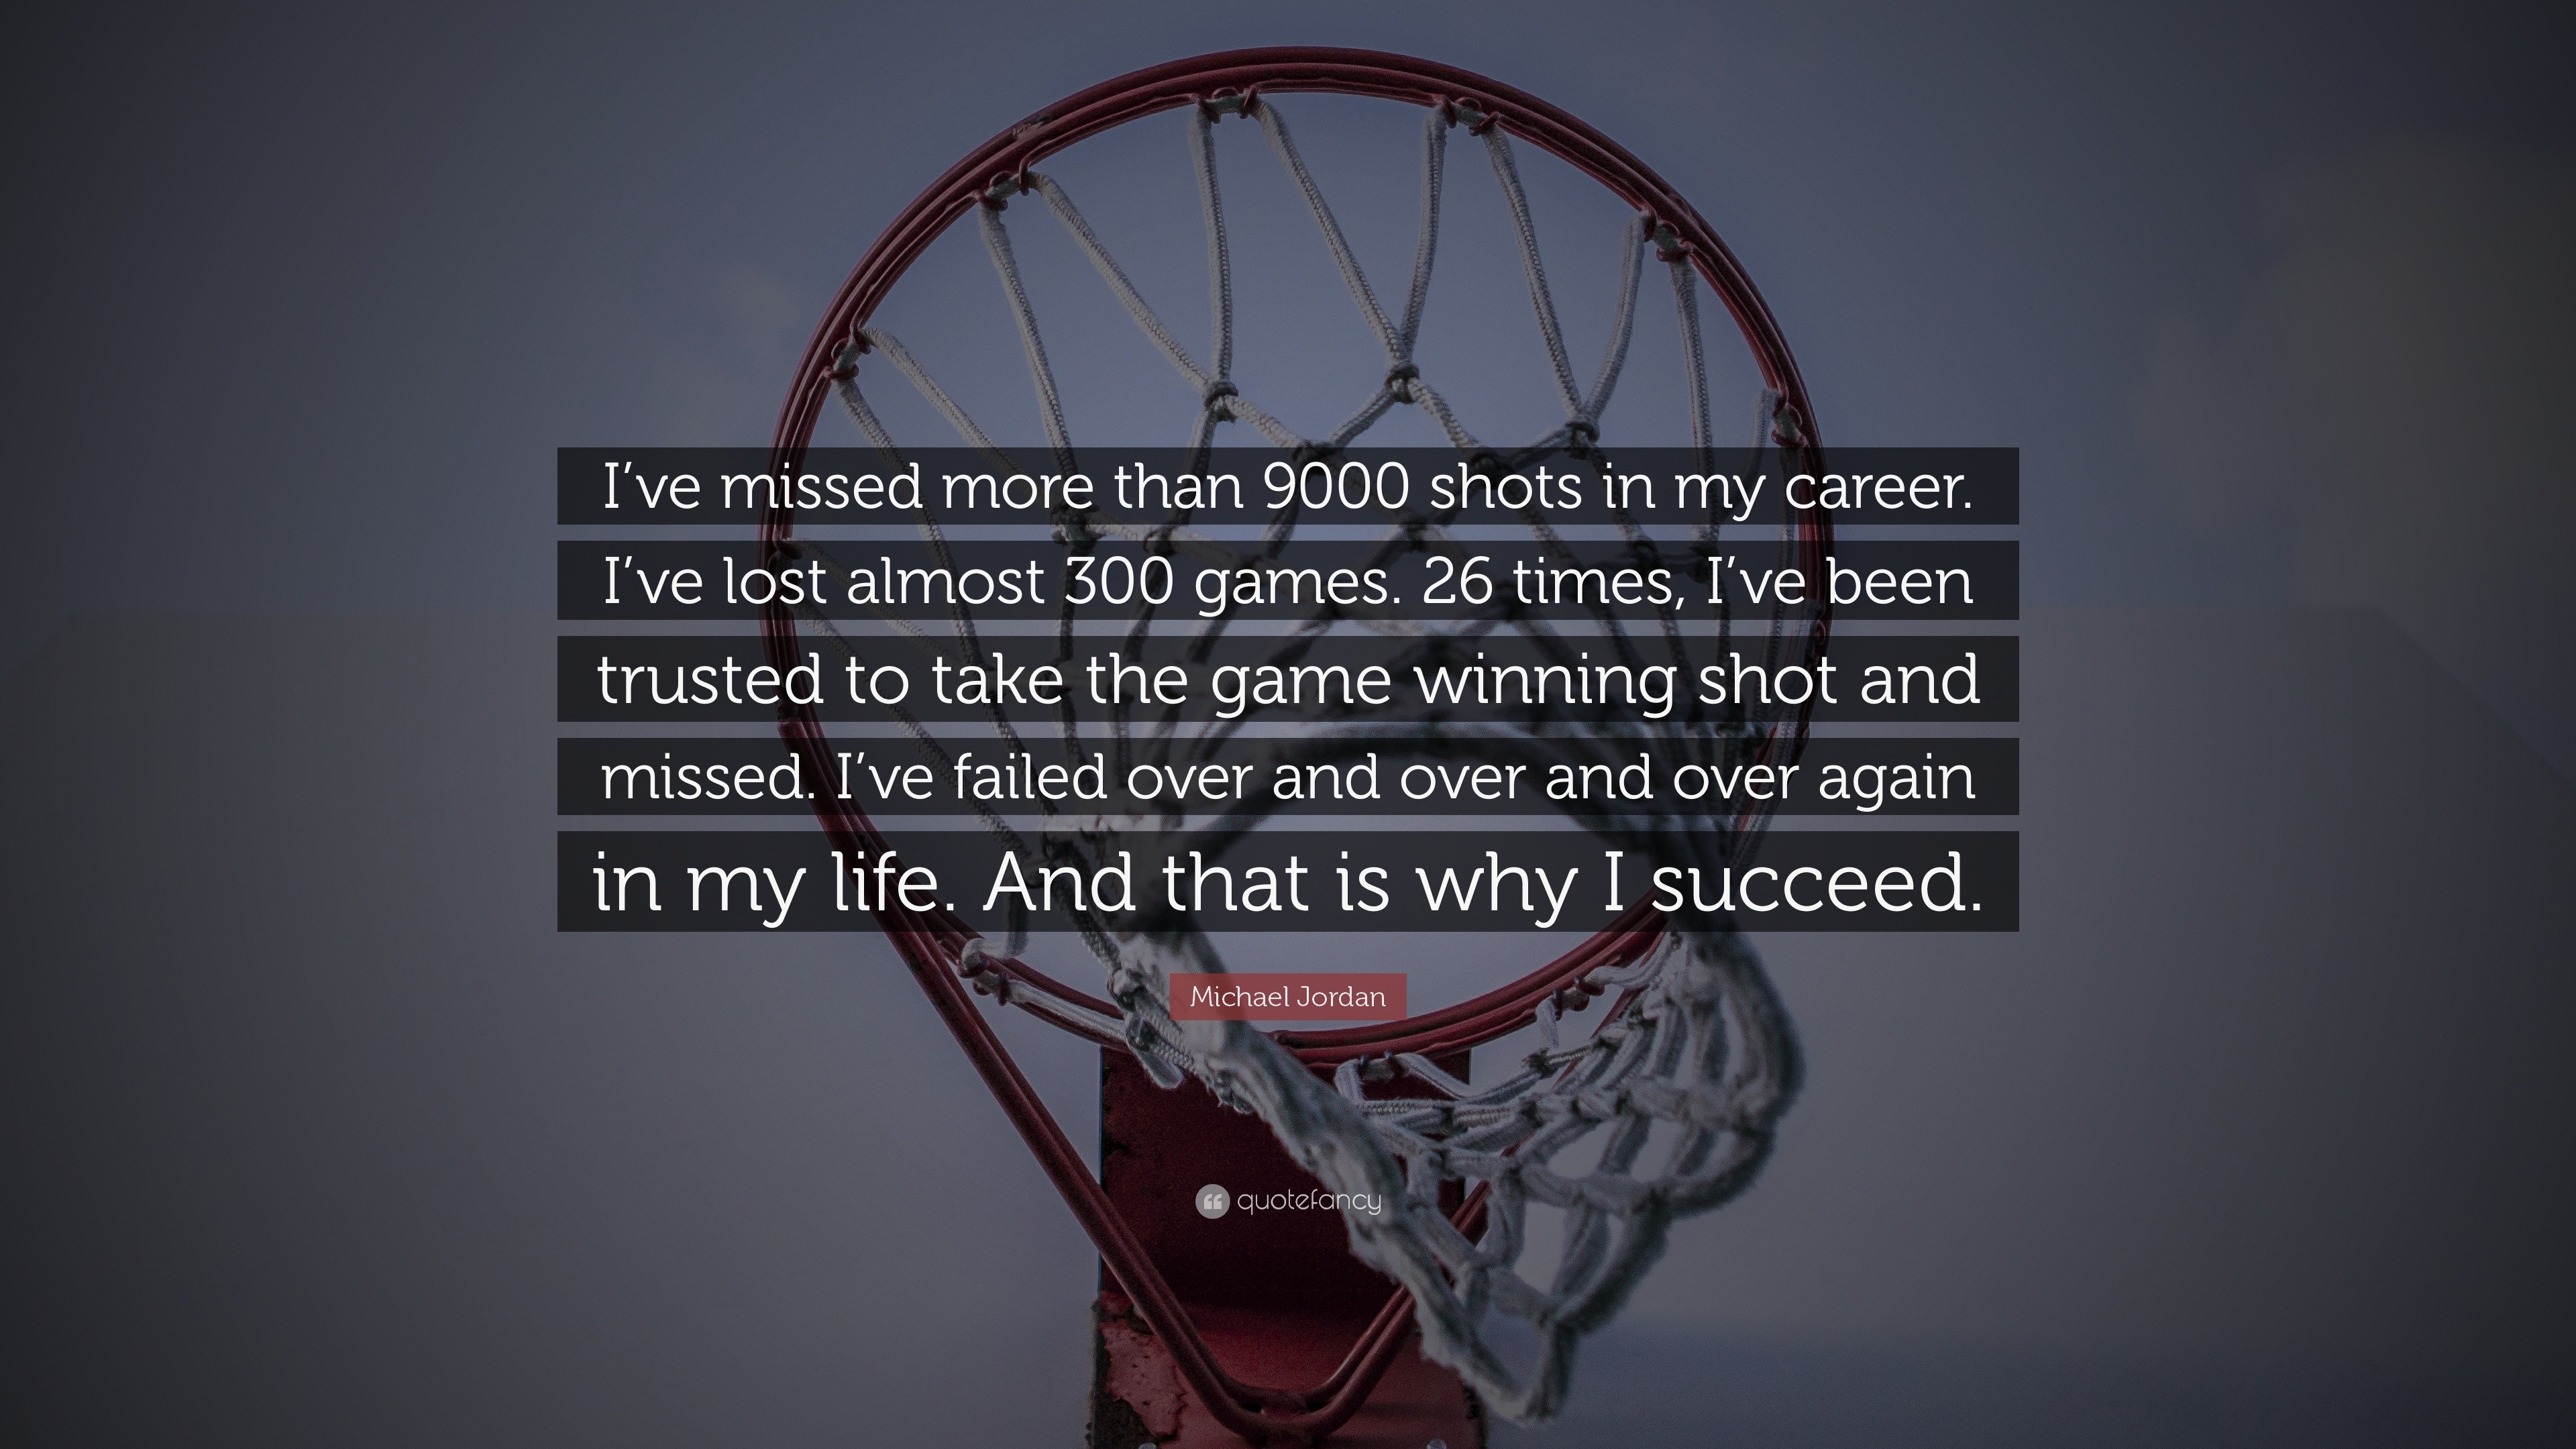 Michael Jordan Quote: "I've missed more than 9000 shots in ...